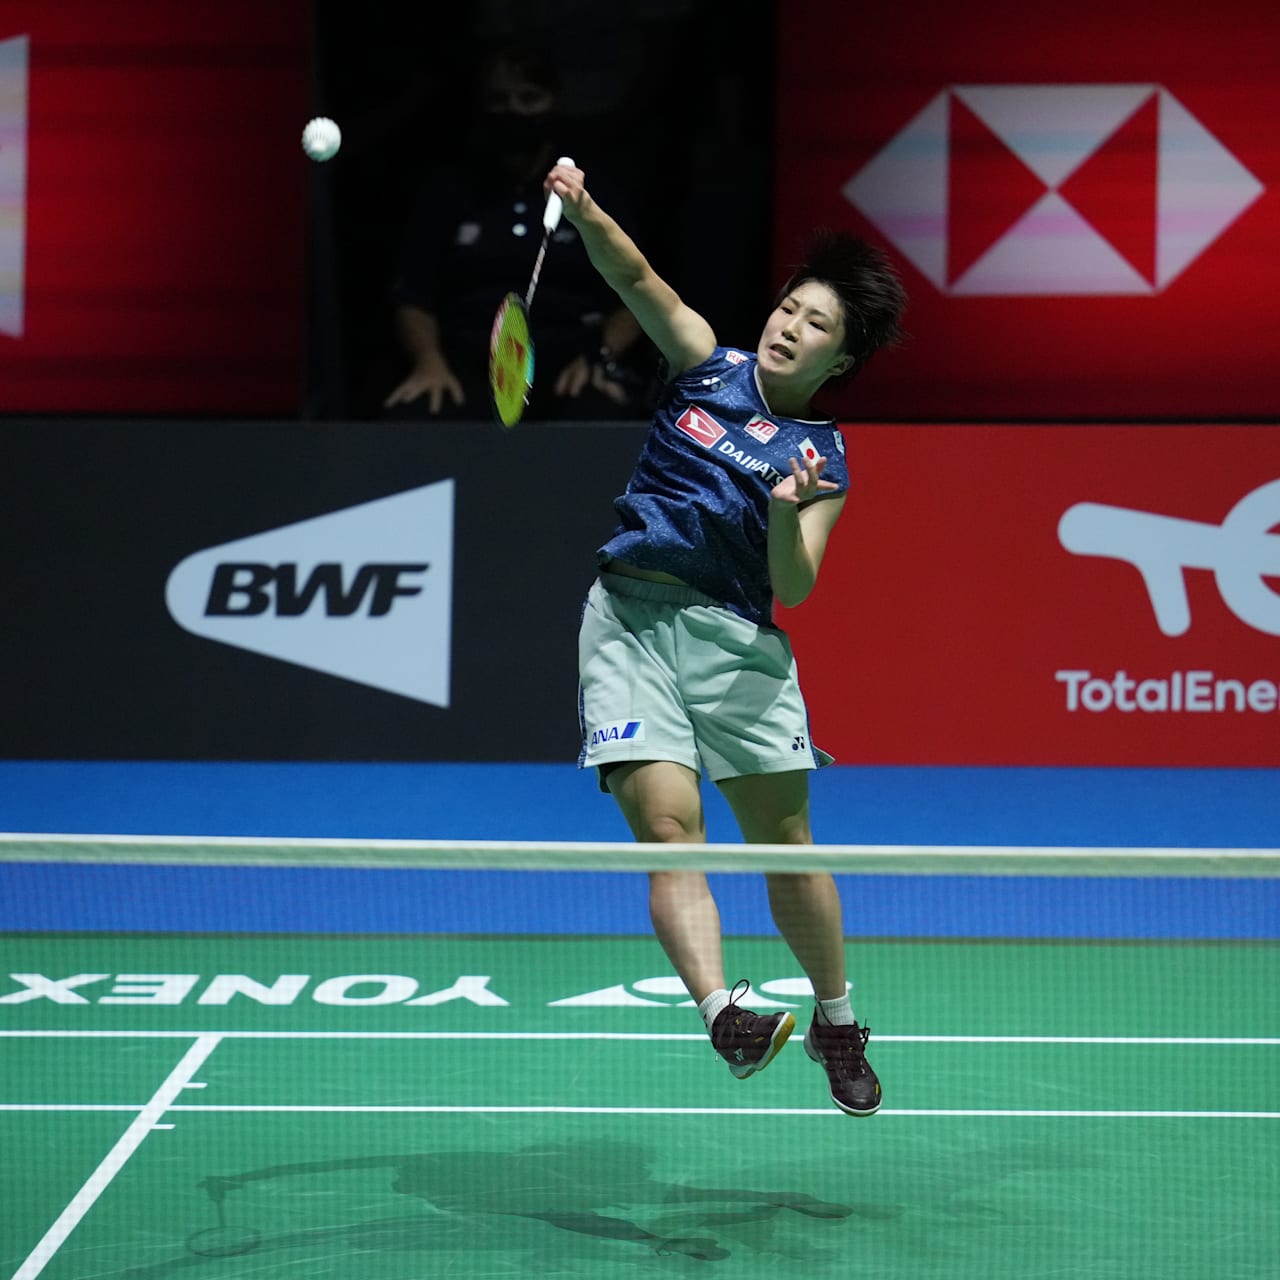 BWF Badminton World Championships 2022 Champions Yamaguchi and Axelsen delight crowds in Tokyo